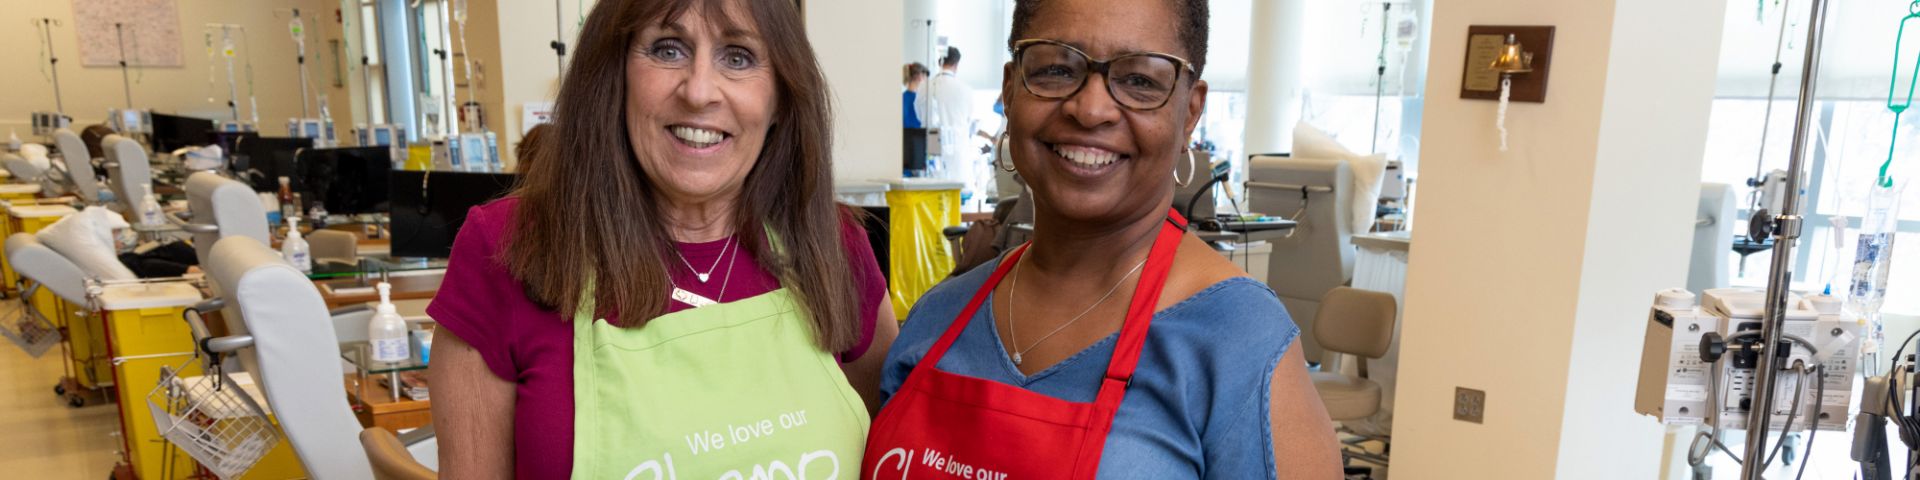 USA Health Mitchell Cancer Center volunteers Debby Lowe (left) and Rhonda Agnew pose for a photo in their new aprons.